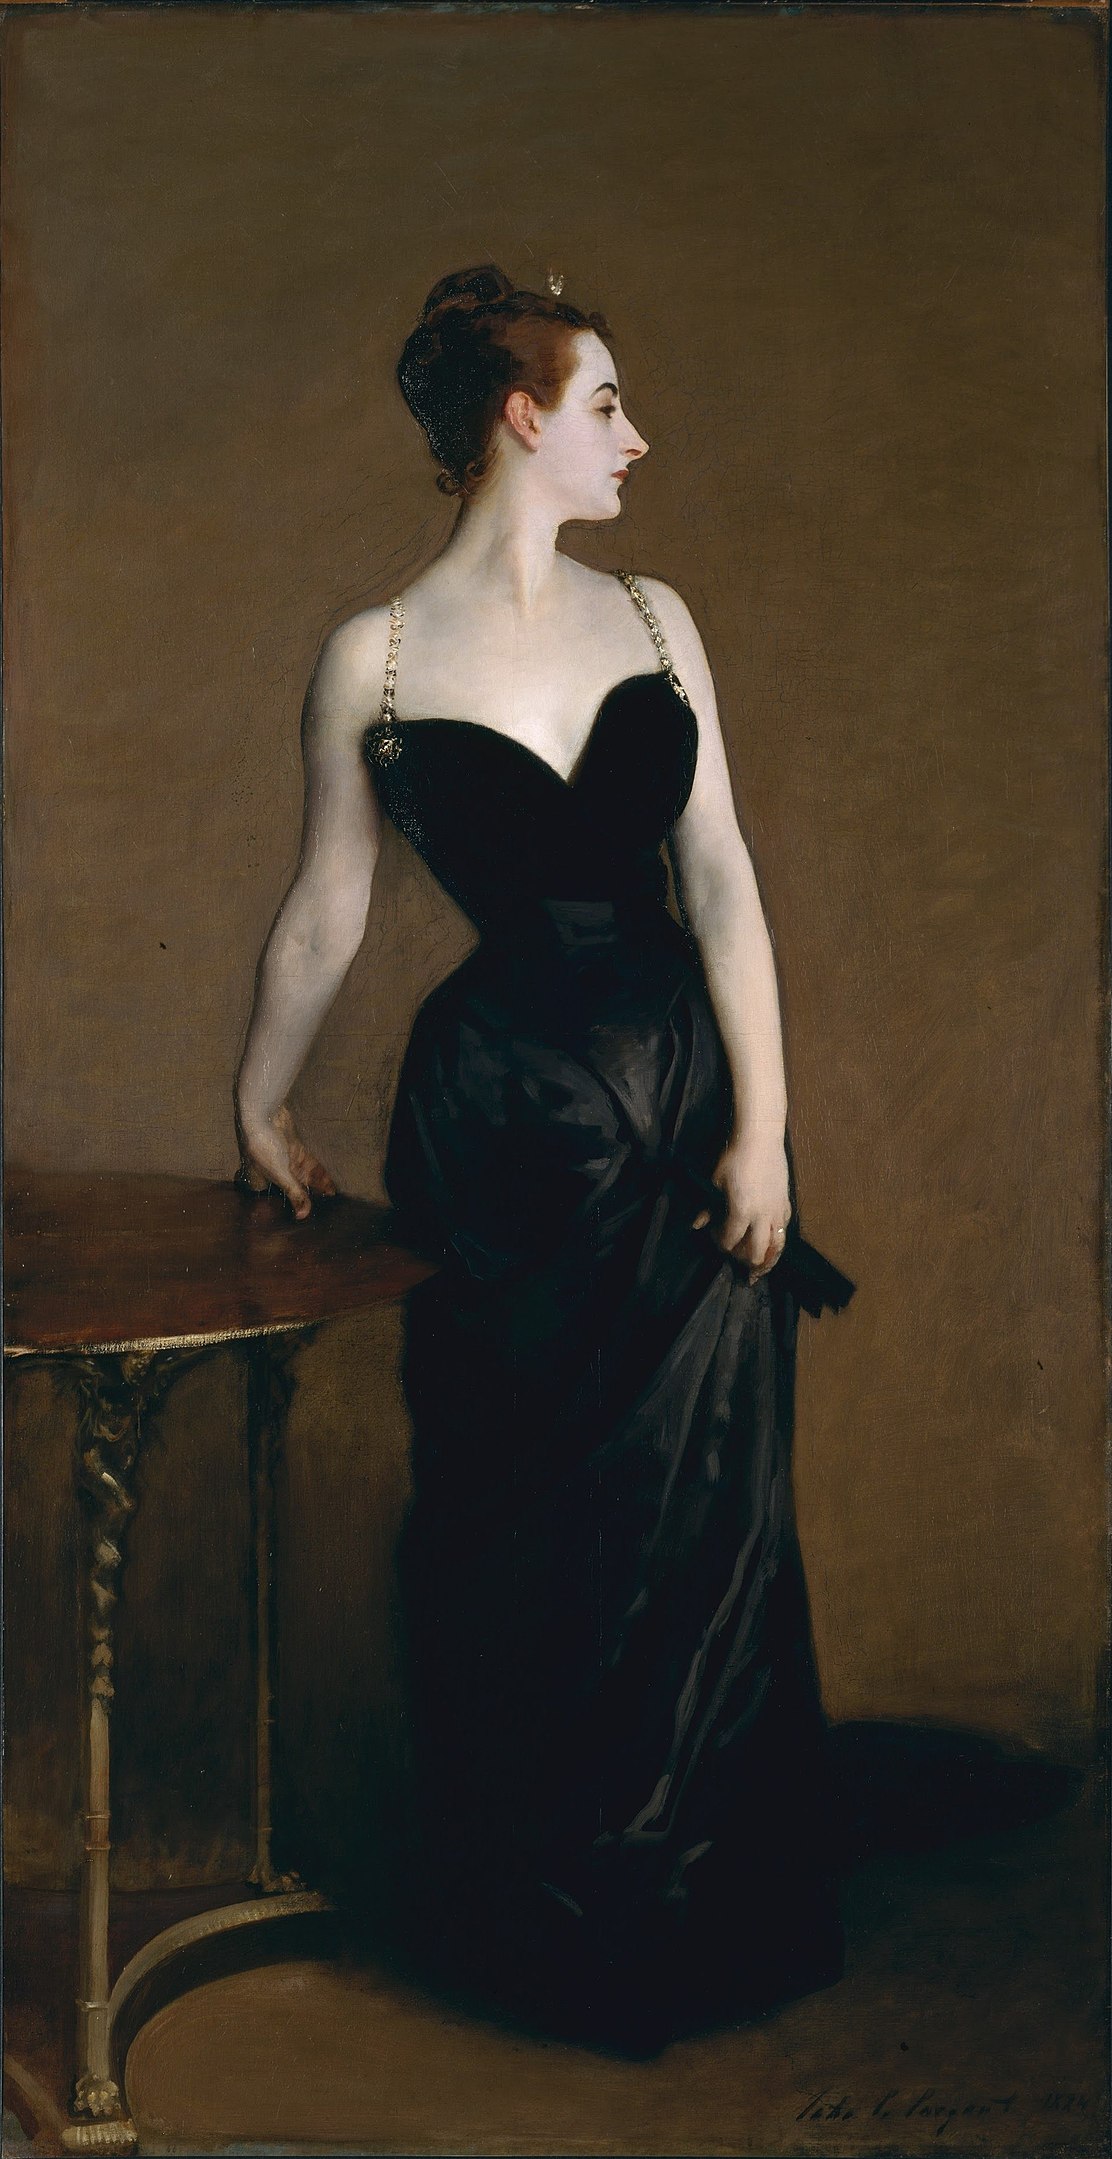 A portrait of a woman in a long black dress with her right hand placed on a table.